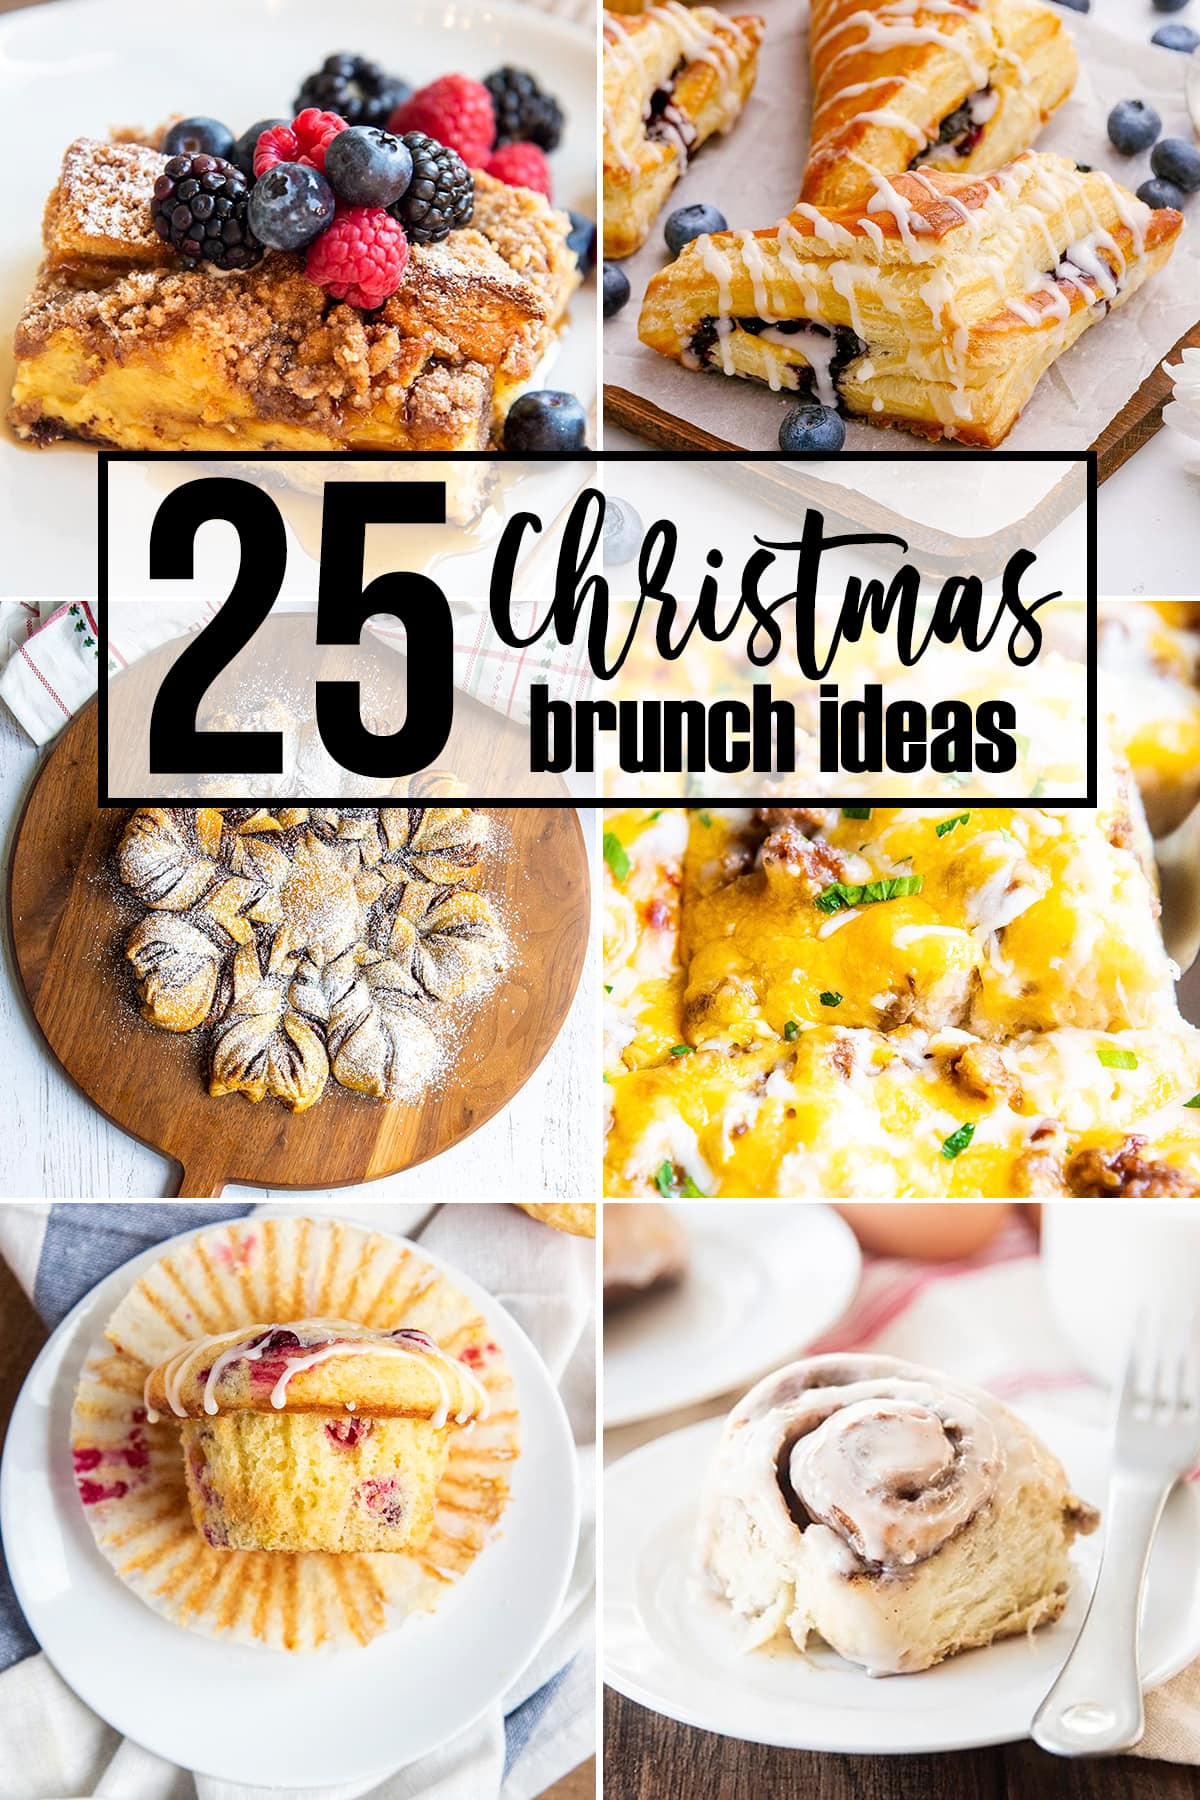 A collage of 6 photos of Christmas brunch ideas including biscuit casserole, cranberry orange muffins, and french toast casserole. 